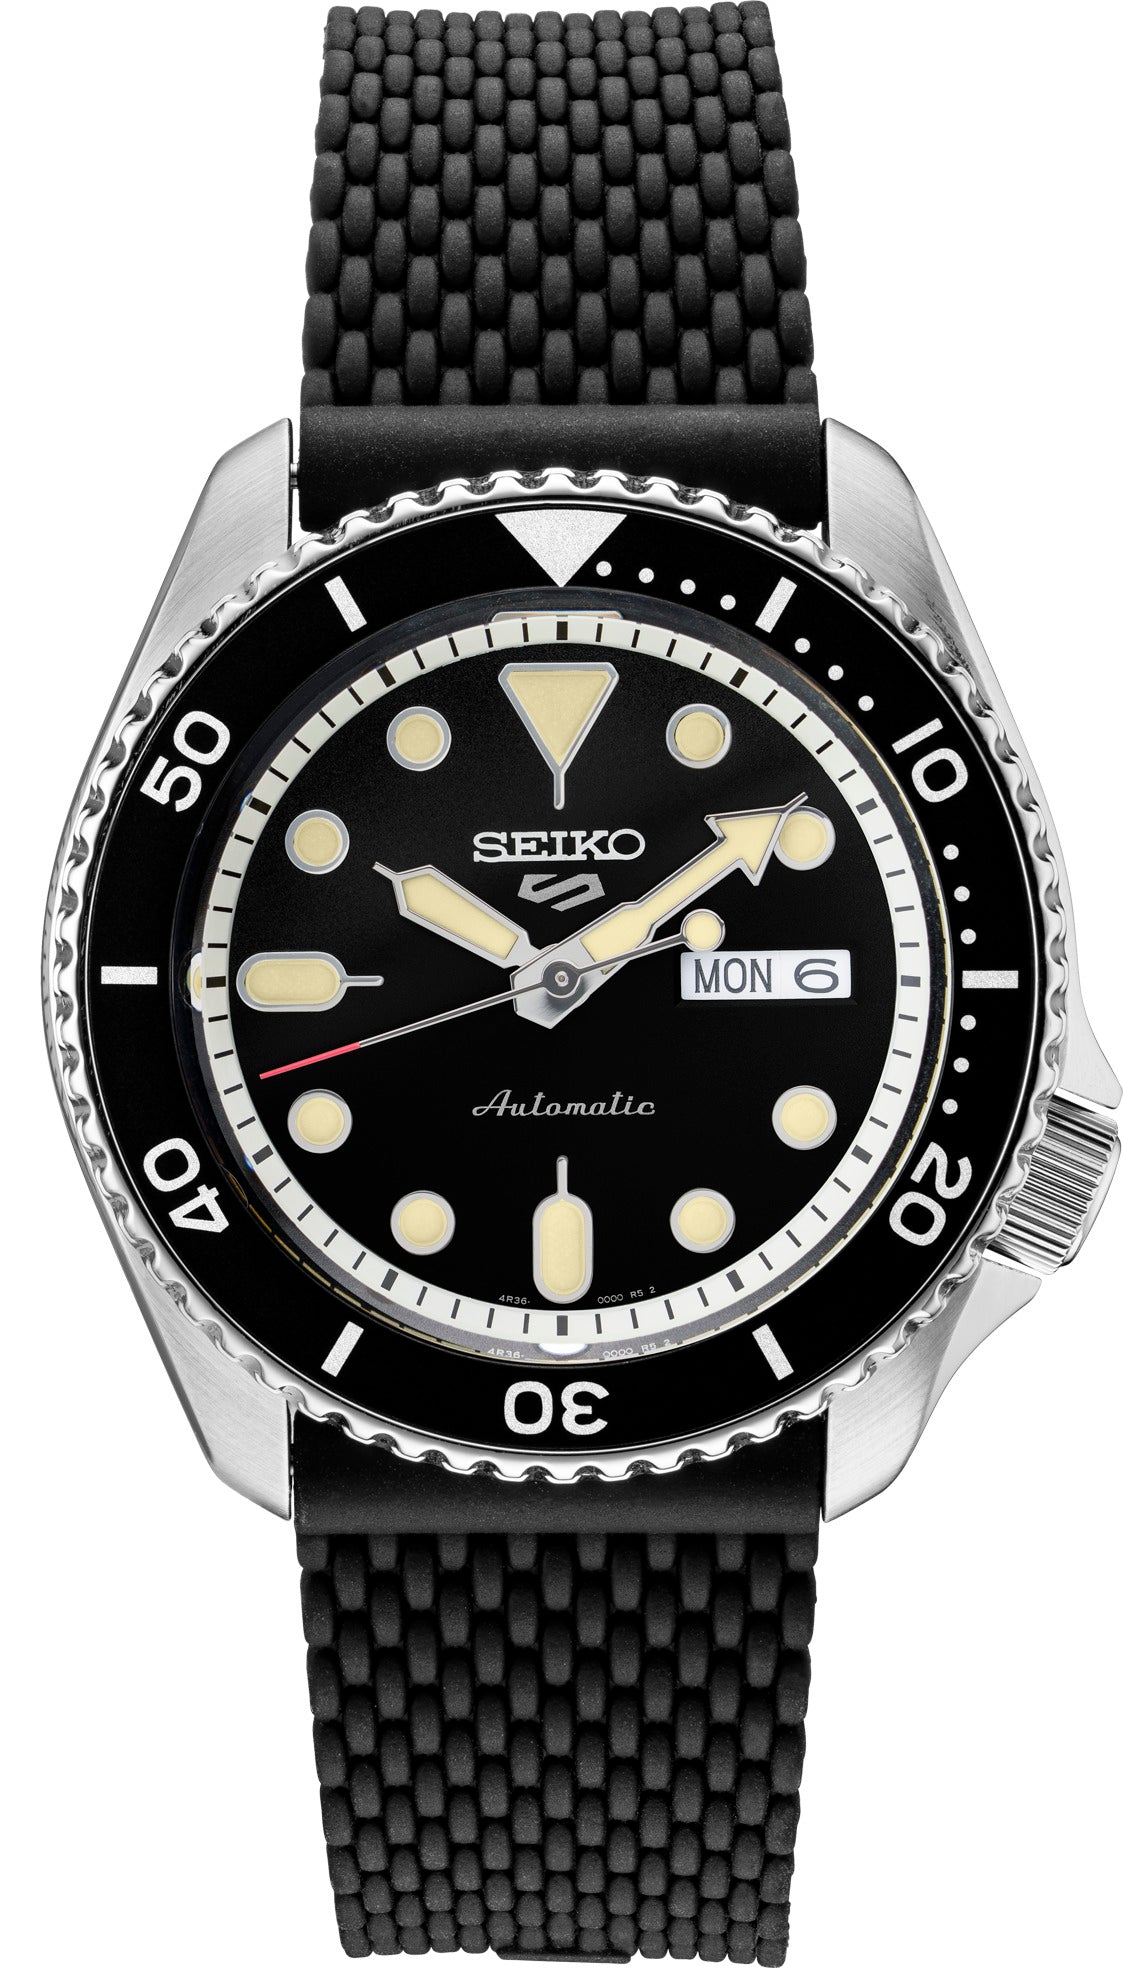 Seiko 5 Sports Men's Stainless Watch in color Black from the front view